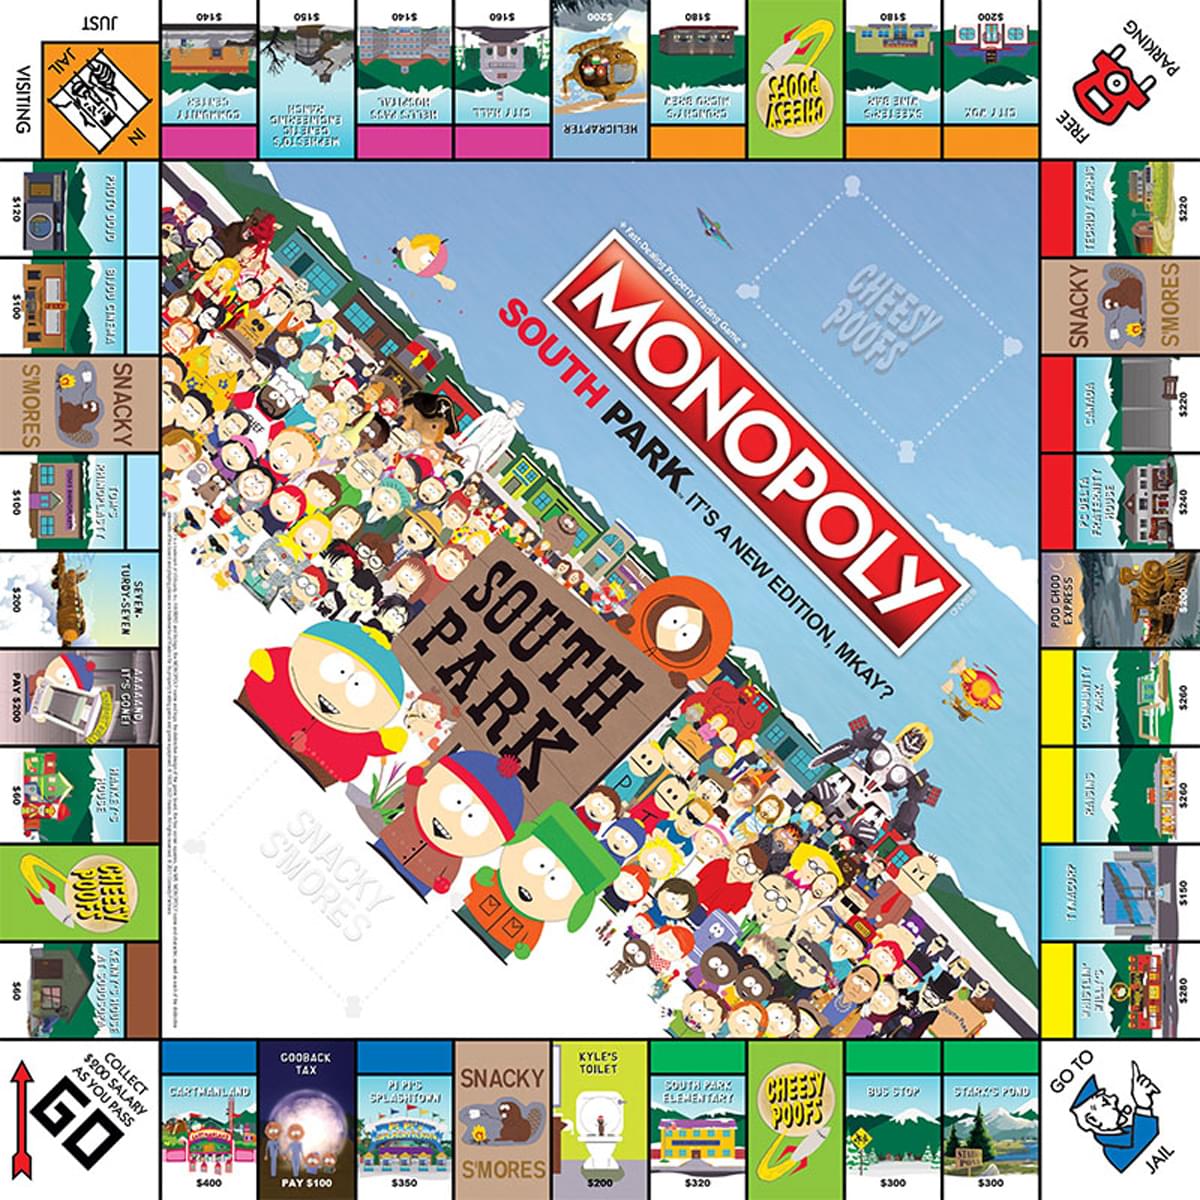 South Park Collectible Monopoly Board Game